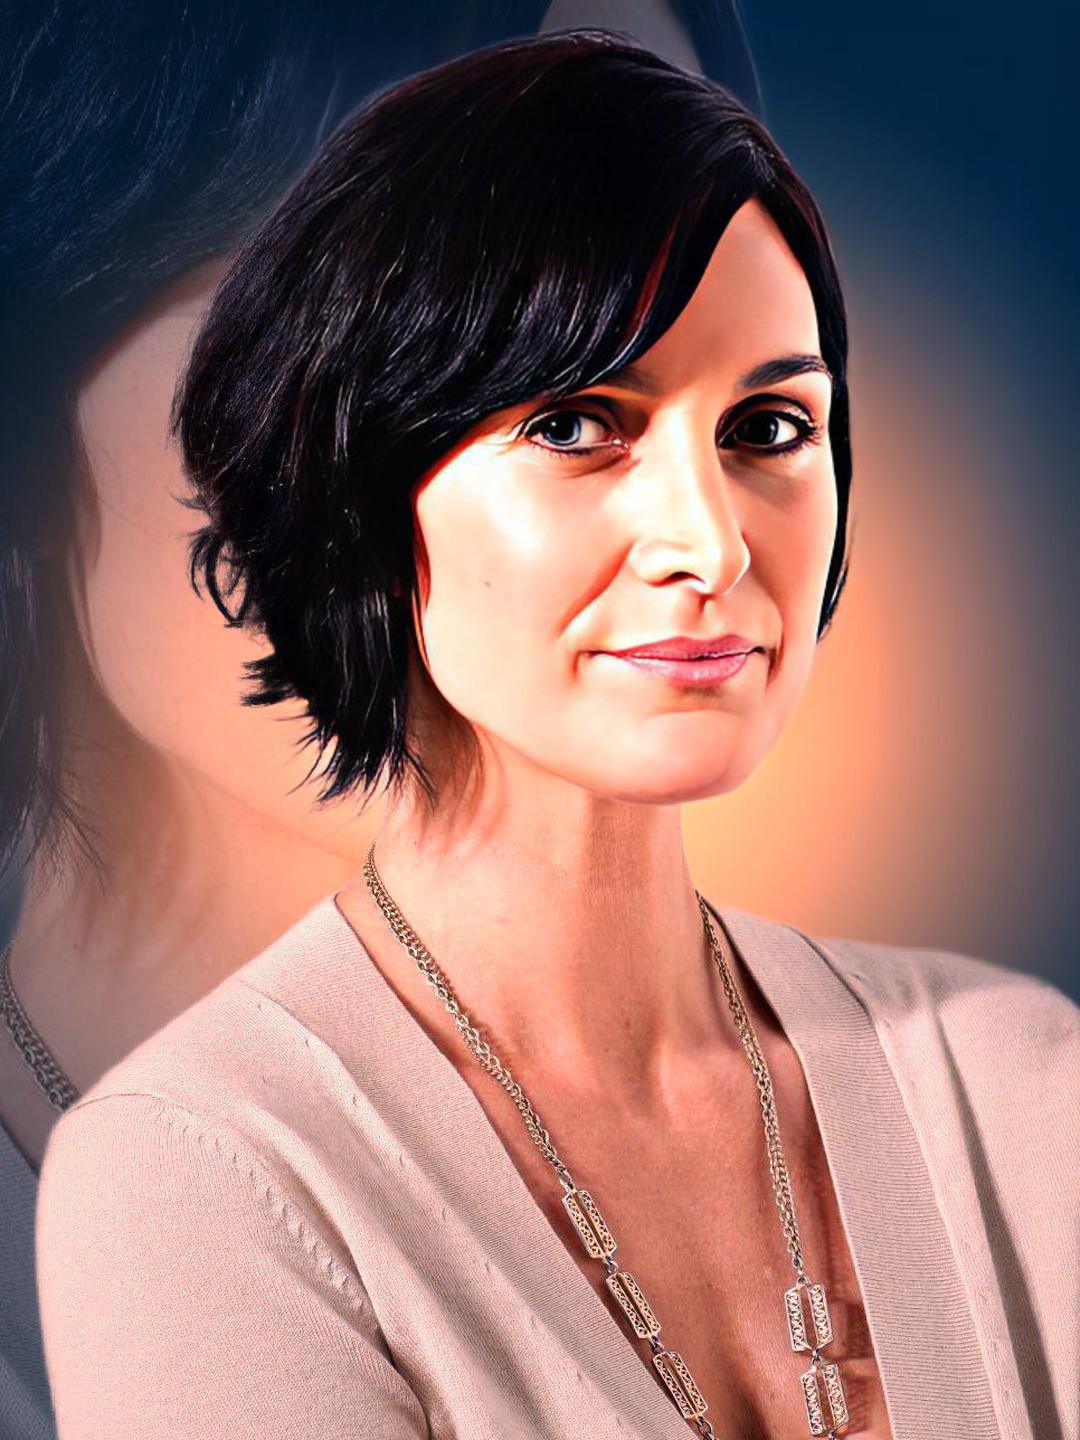 Lili Luxe Hd Xxx Fucking Videos Download - Carrie-Anne Moss - Celeb ART - Beautiful Artworks of Celebrities,  Footballers, Politicians and Famous People in World | OpenSea